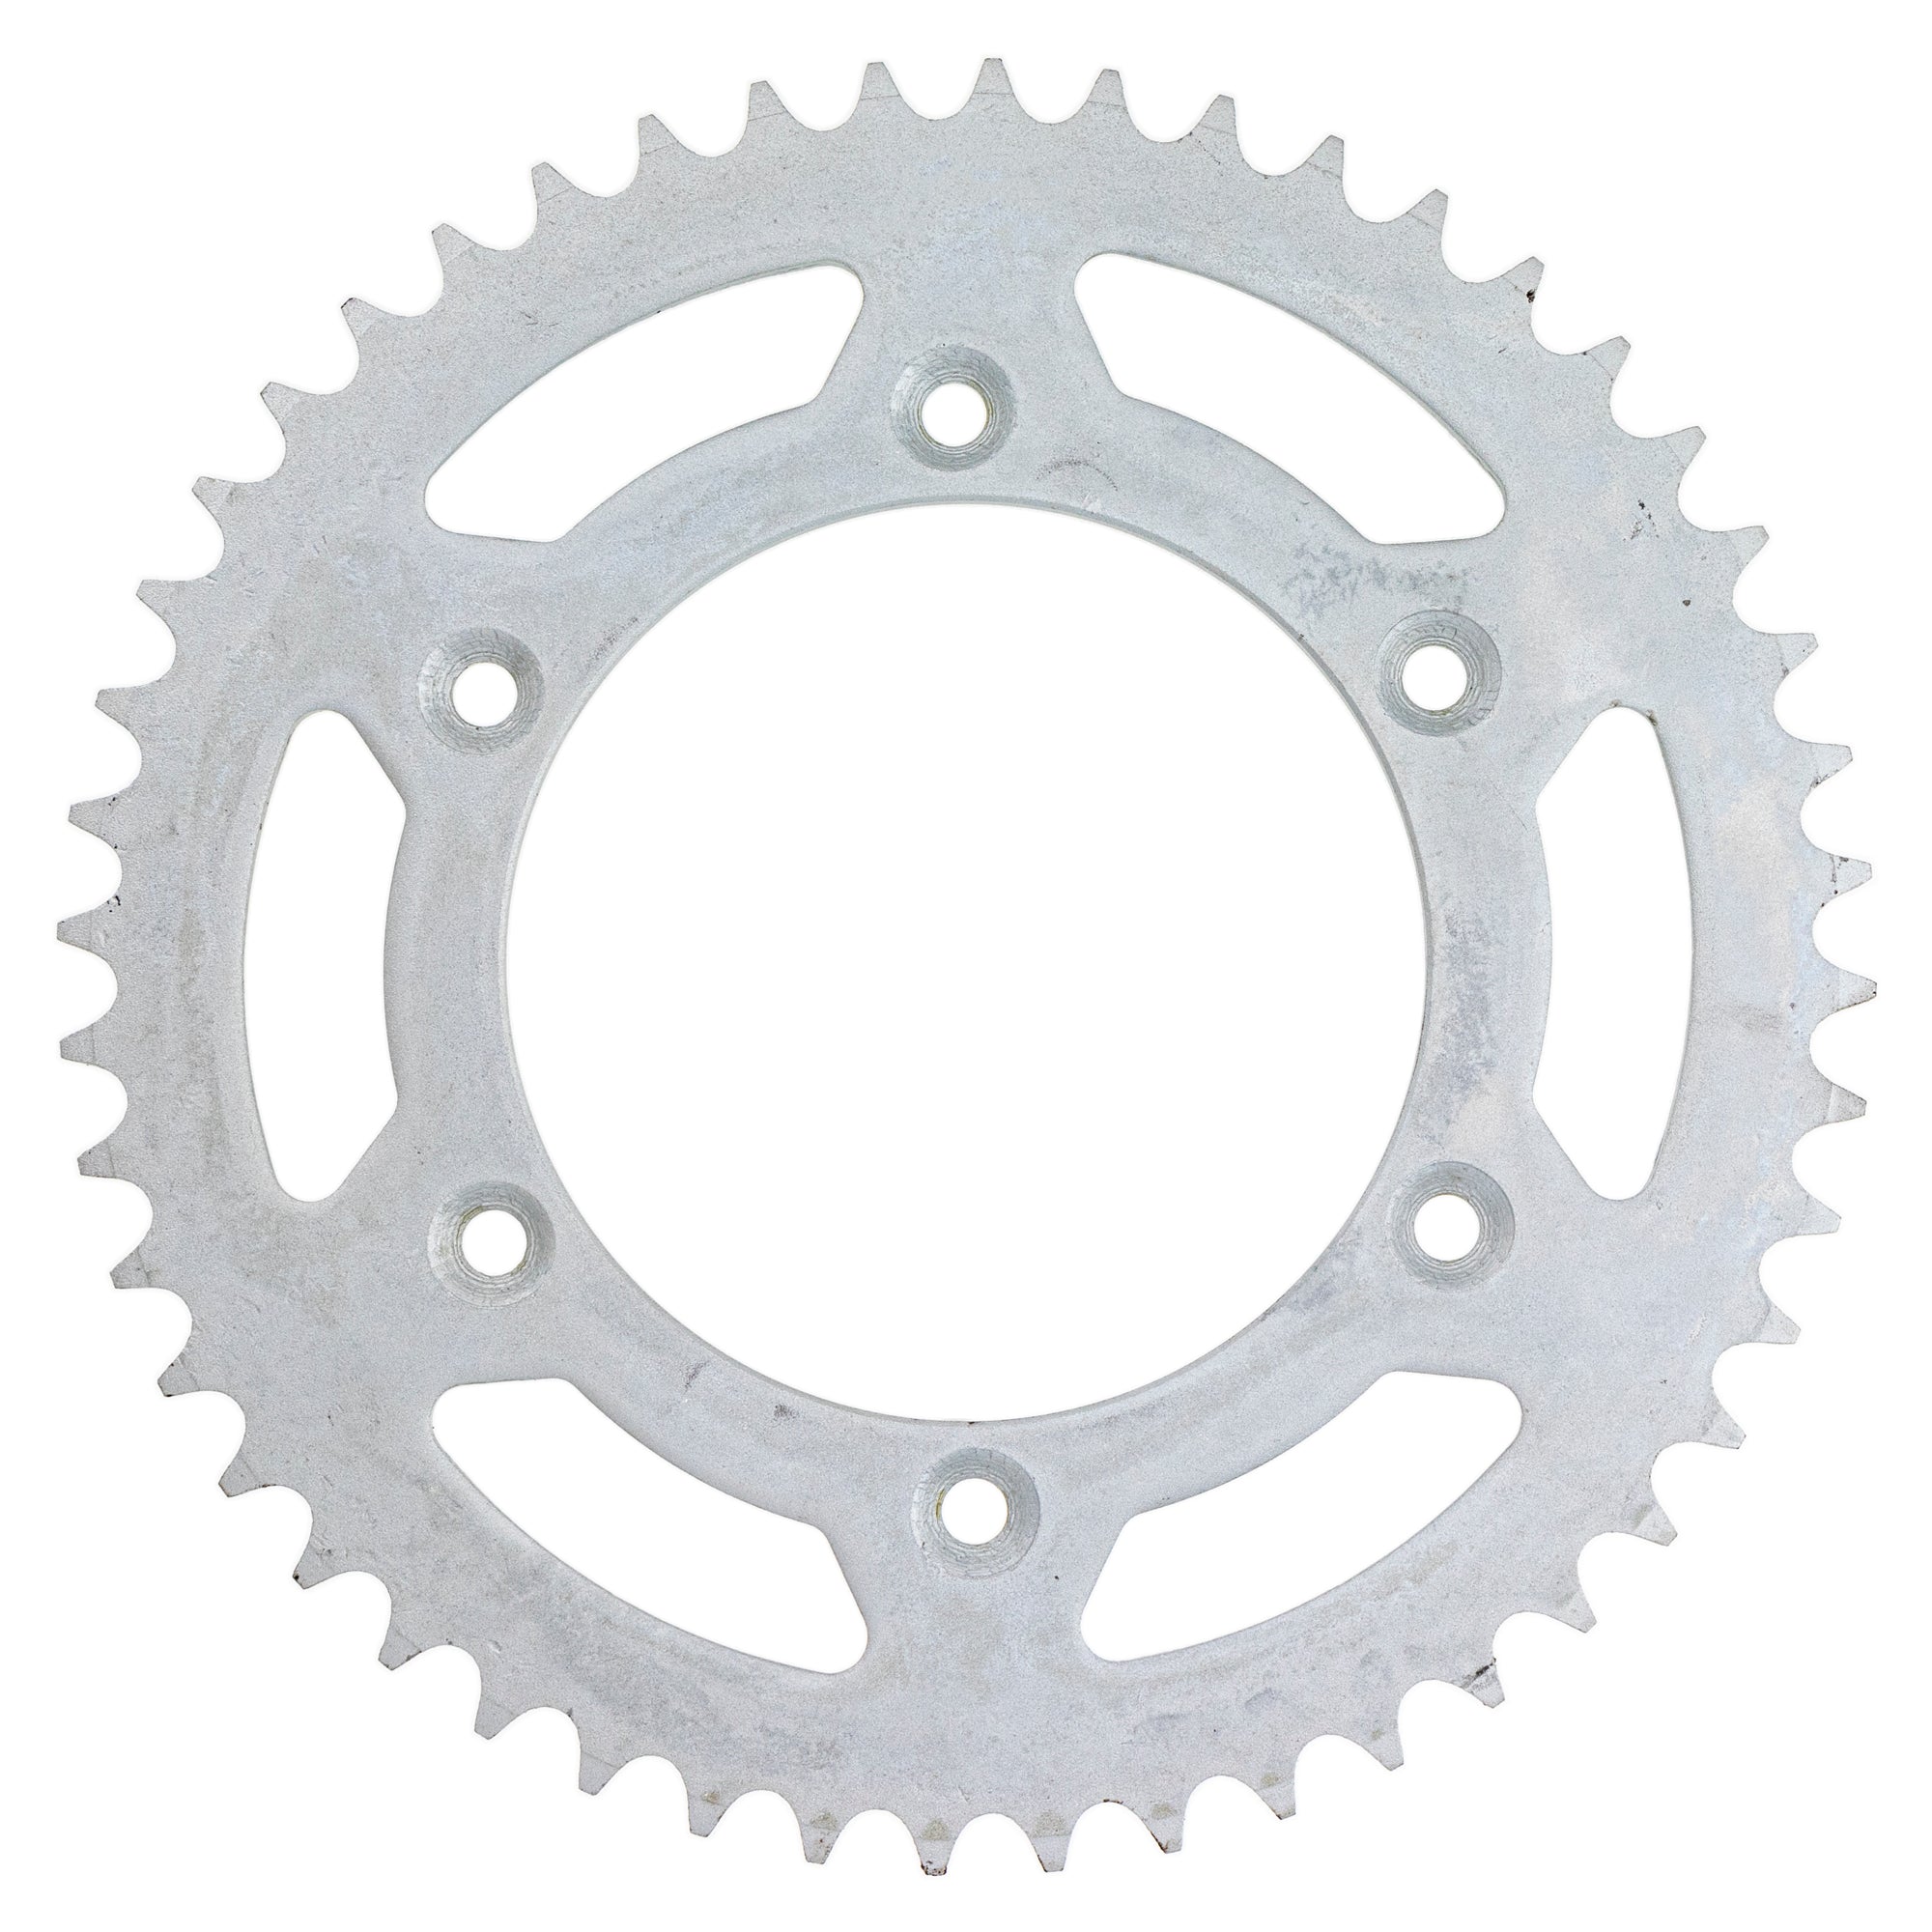 520 Pitch Front 15T Rear 48T Drive Sprocket Kit for KTM 250 300 400